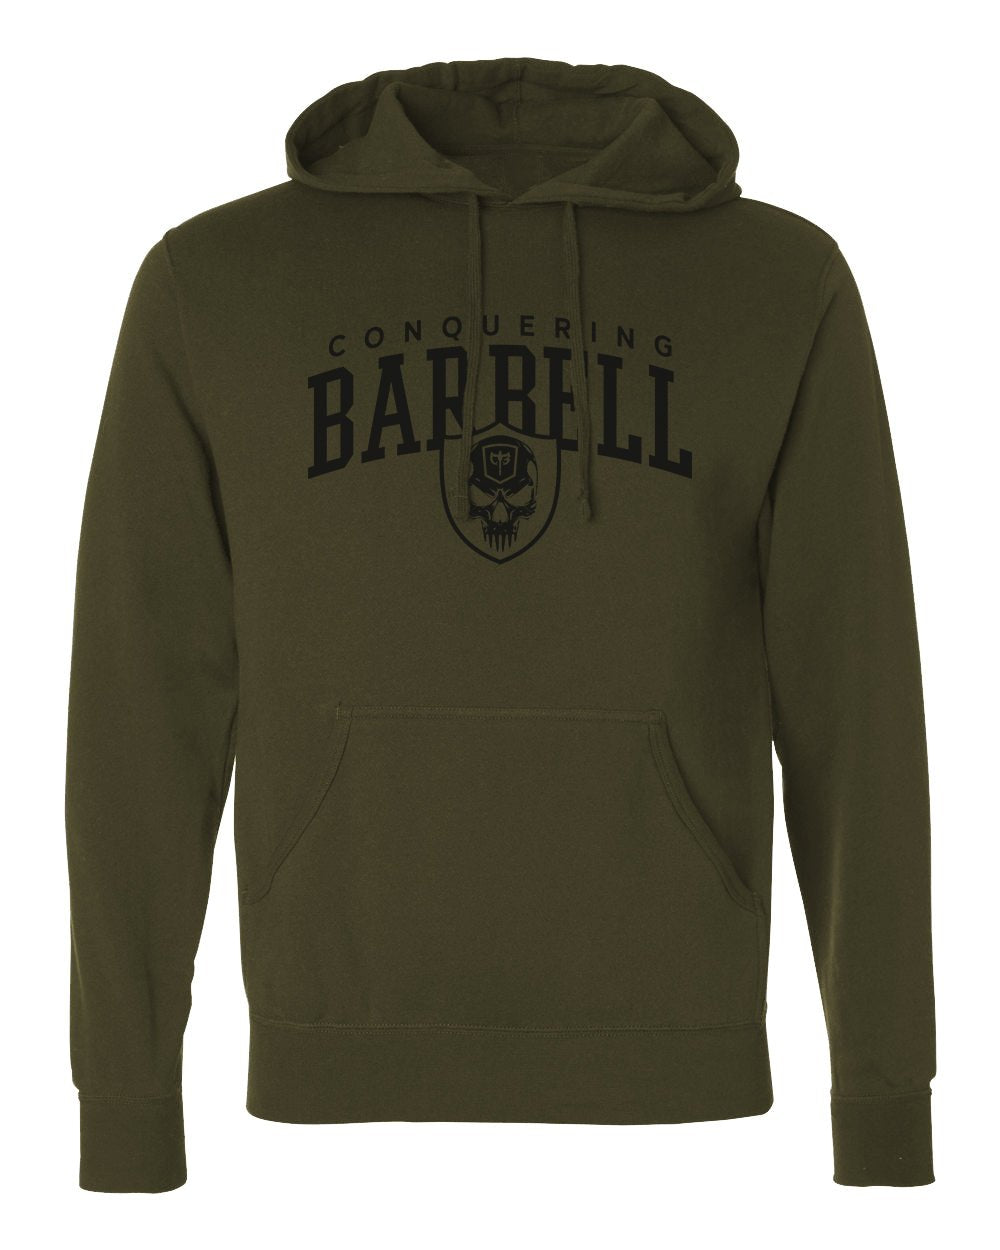 Conquering Barbell Athletics - on Army Pullover Hoodie - Conquering Barbell